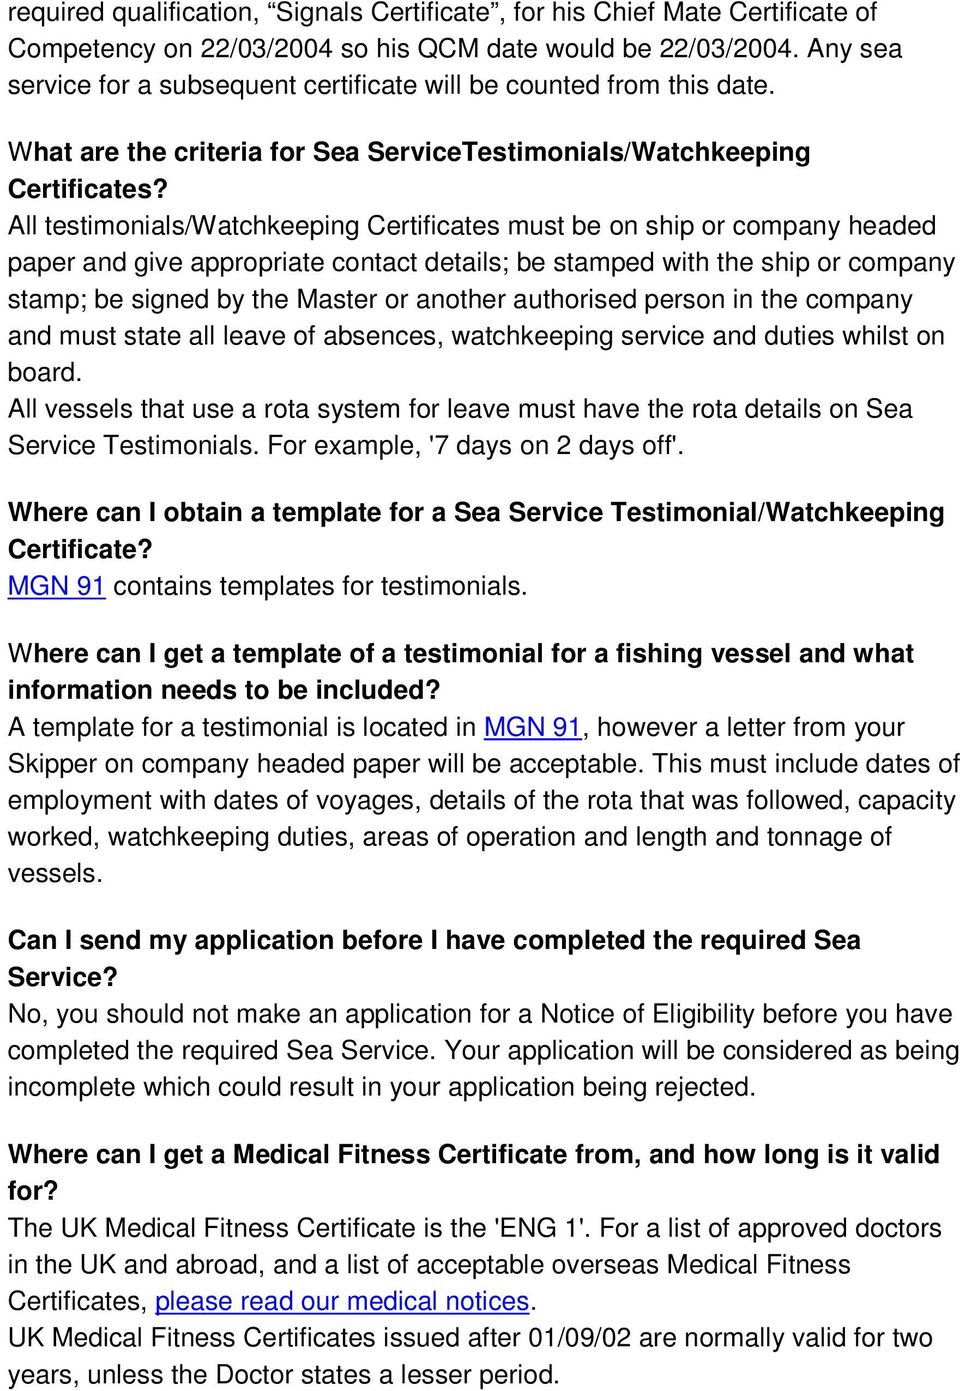 All testimonials/watchkeeping Certificates must be on ship or company headed paper and give appropriate contact details; be stamped with the ship or company stamp; be signed by the Master or another